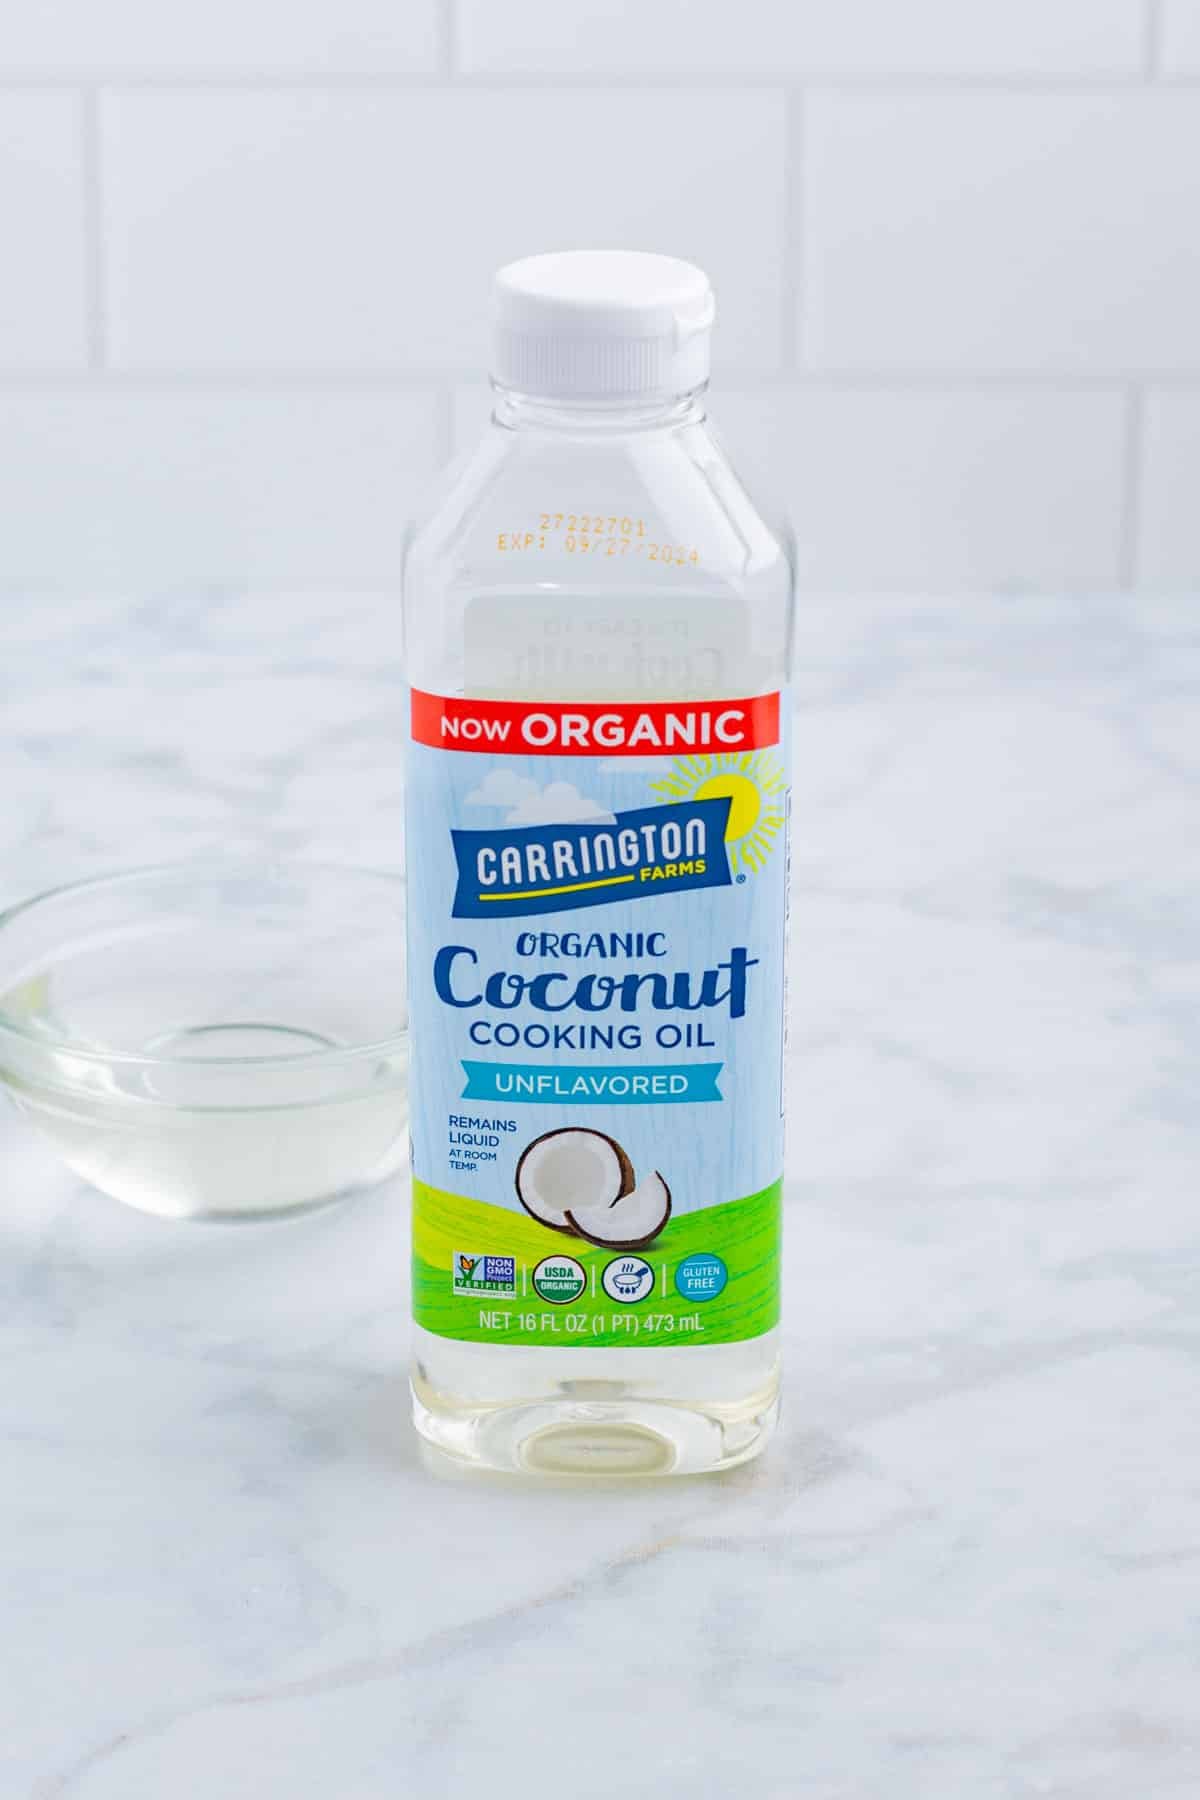 Coconut cooking oil in its original container.